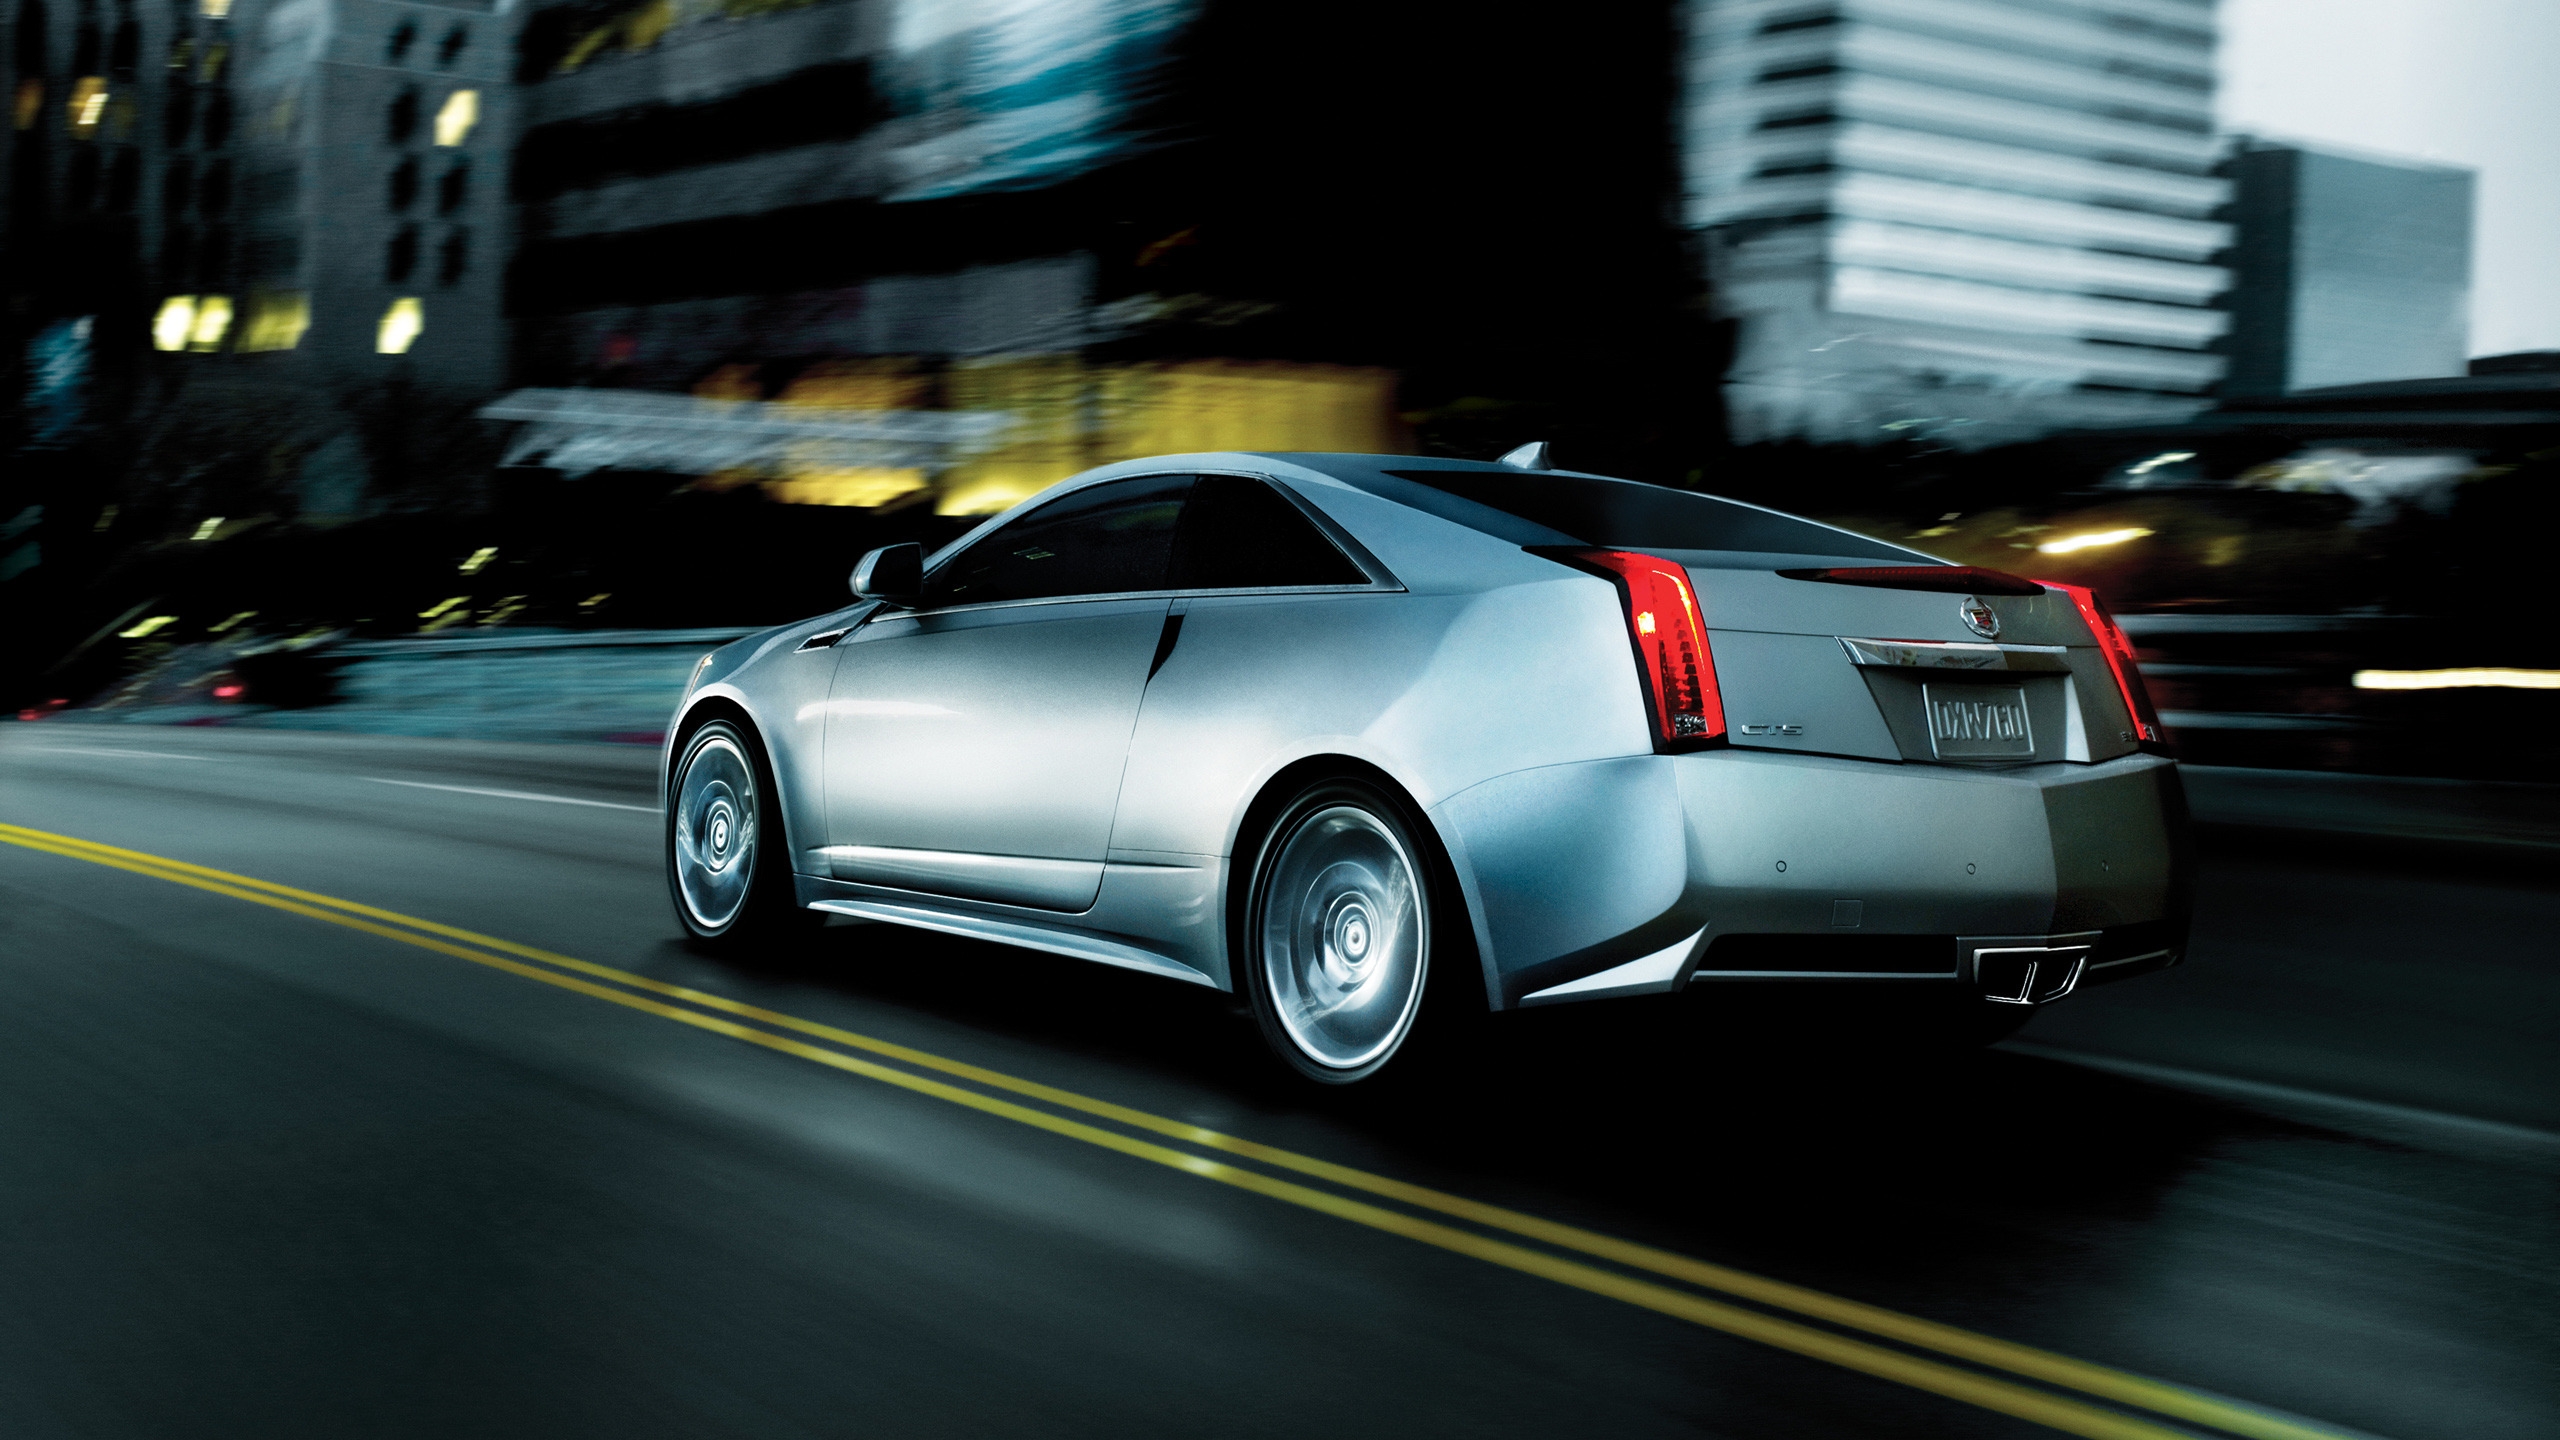 Cadillac CTS Coupe Speed for 2560x1440 HDTV resolution